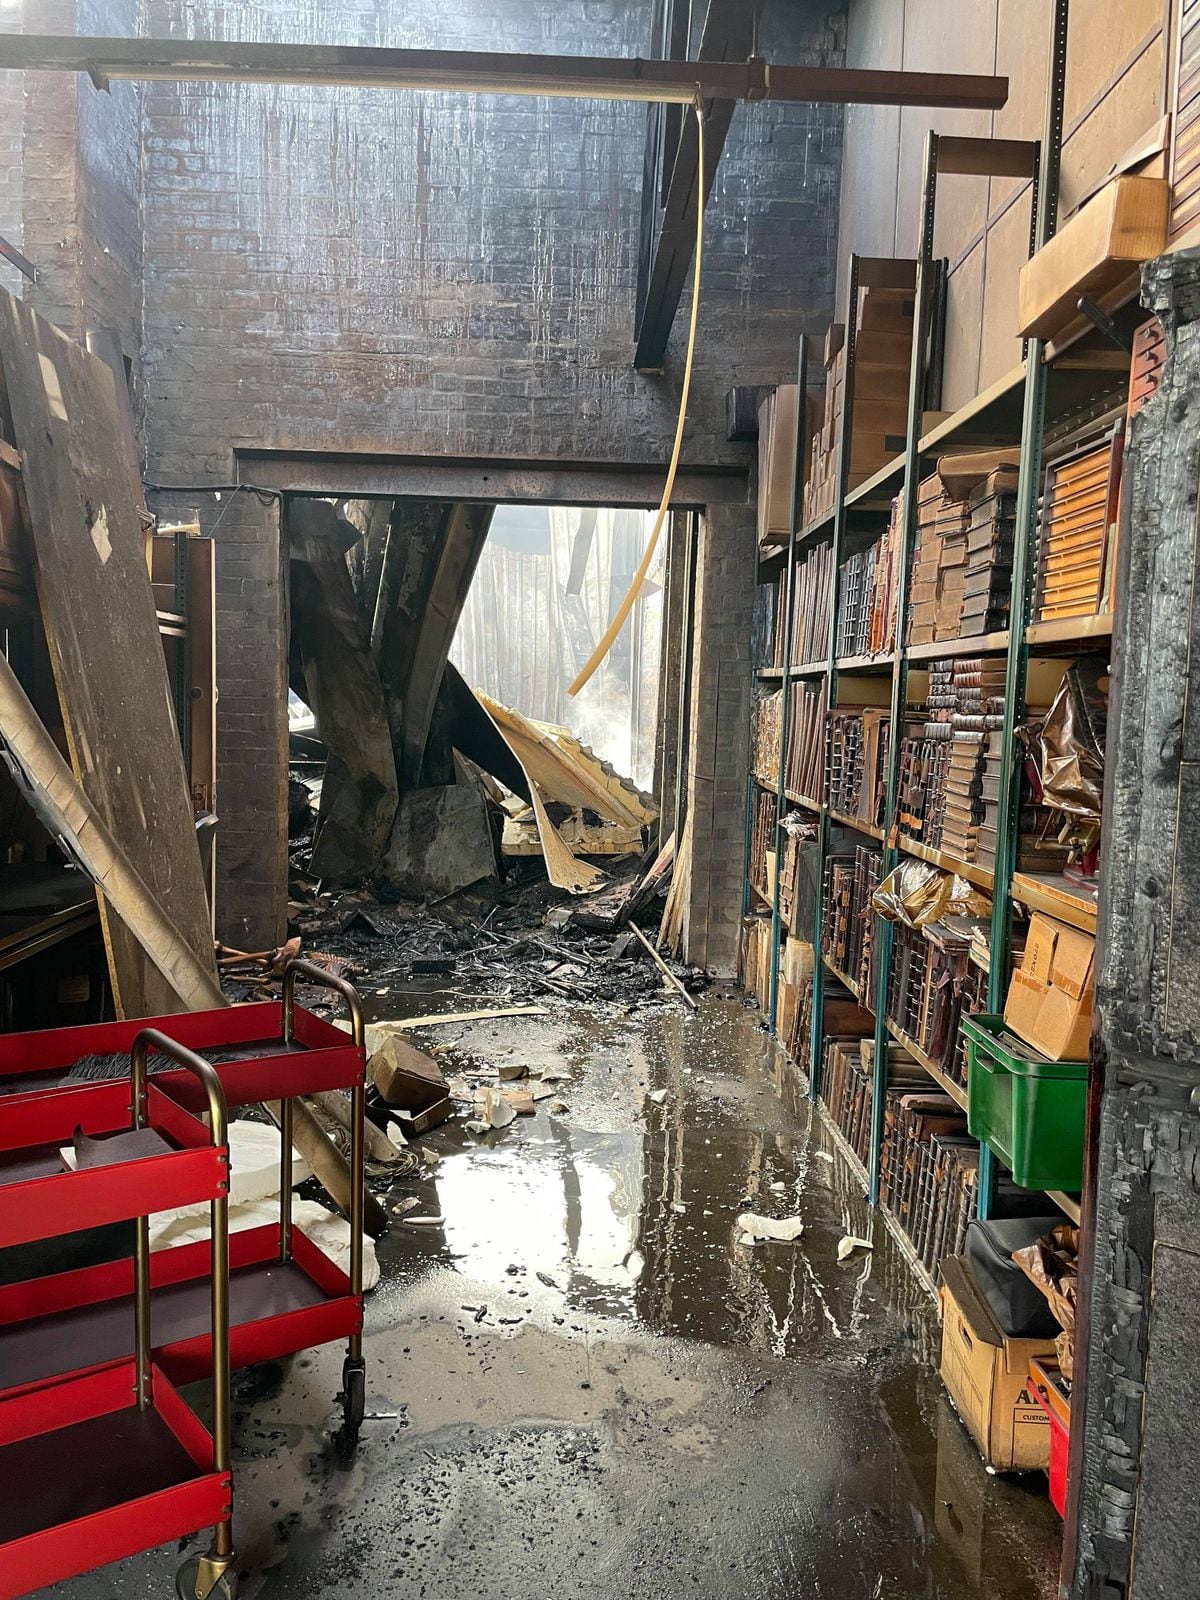 Some of the books damaged by fire and water 